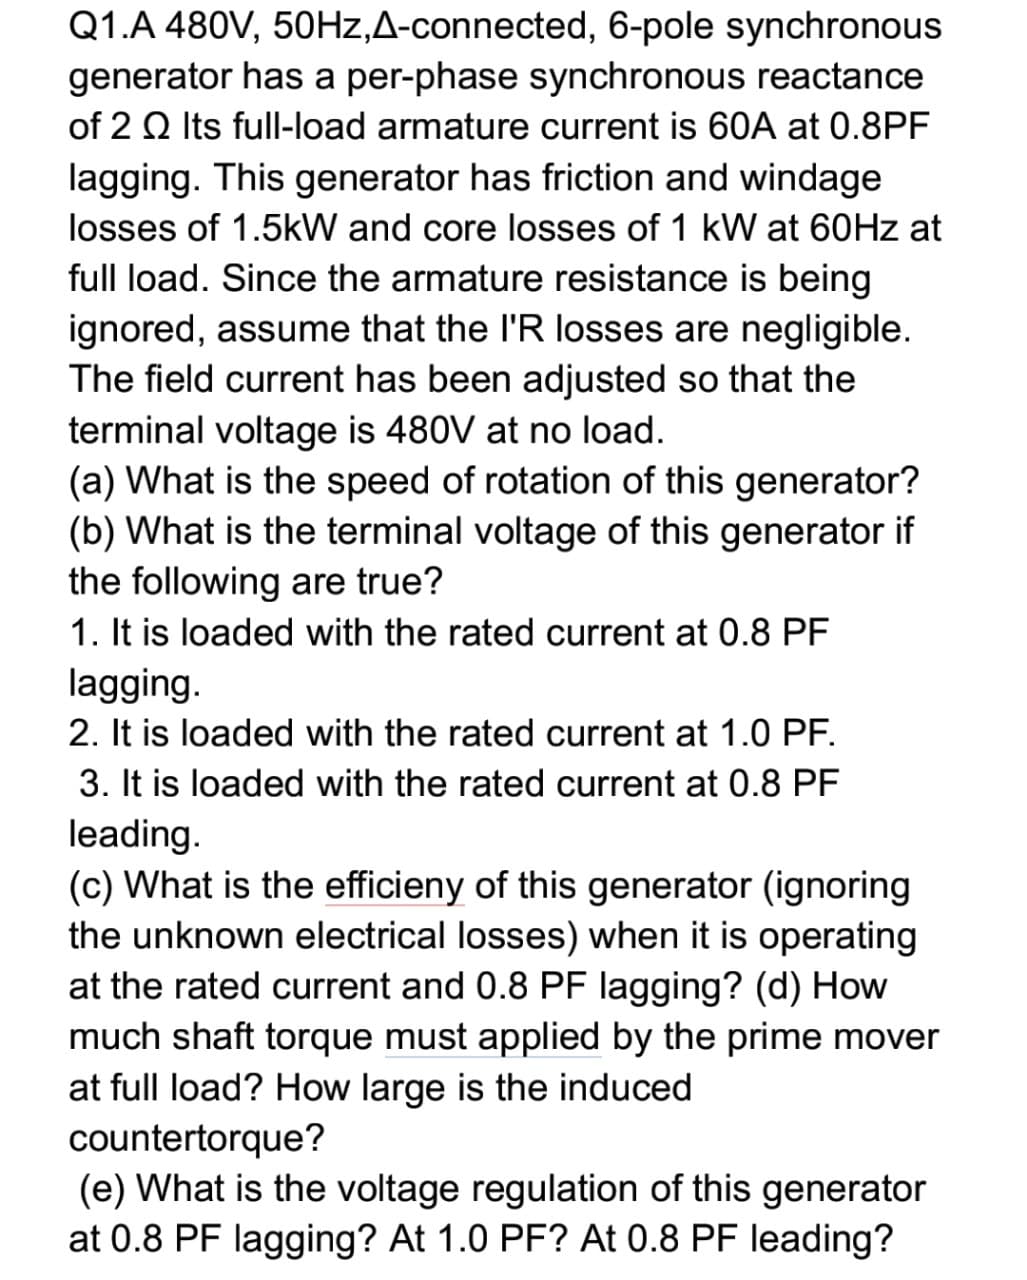 Q1.A 480V, 50HZ,A-connected, 6-pole synchronous
generator has a per-phase synchronous reactance
of 2 Q Its full-load armature current is 60A at 0.8PF
lagging. This generator has friction and windage
losses of 1.5kW and core losses of 1 kW at 60HZ at
full load. Since the armature resistance is being
ignored, assume that the I'R losses are negligible.
The field current has been adjusted so that the
terminal voltage is 480V at no load.
(a) What is the speed of rotation of this generator?
(b) What is the terminal voltage of this generator if
the following are true?
1. It is loaded with the rated current at 0.8 PF
lagging.
2. It is loaded with the rated current at 1.0 PF.
3. It is loaded with the rated current at 0.8 PF
leading.
(c) What is the efficieny of this generator (ignoring
the unknown electrical losses) when it is operating
at the rated current and 0.8 PF lagging? (d) How
much shaft torque must applied by the prime mover
at full load? How large is the induced
countertorque?
(e) What is the voltage regulation of this generator
at 0.8 PF lagging? At 1.0 PF? At 0.8 PF leading?
